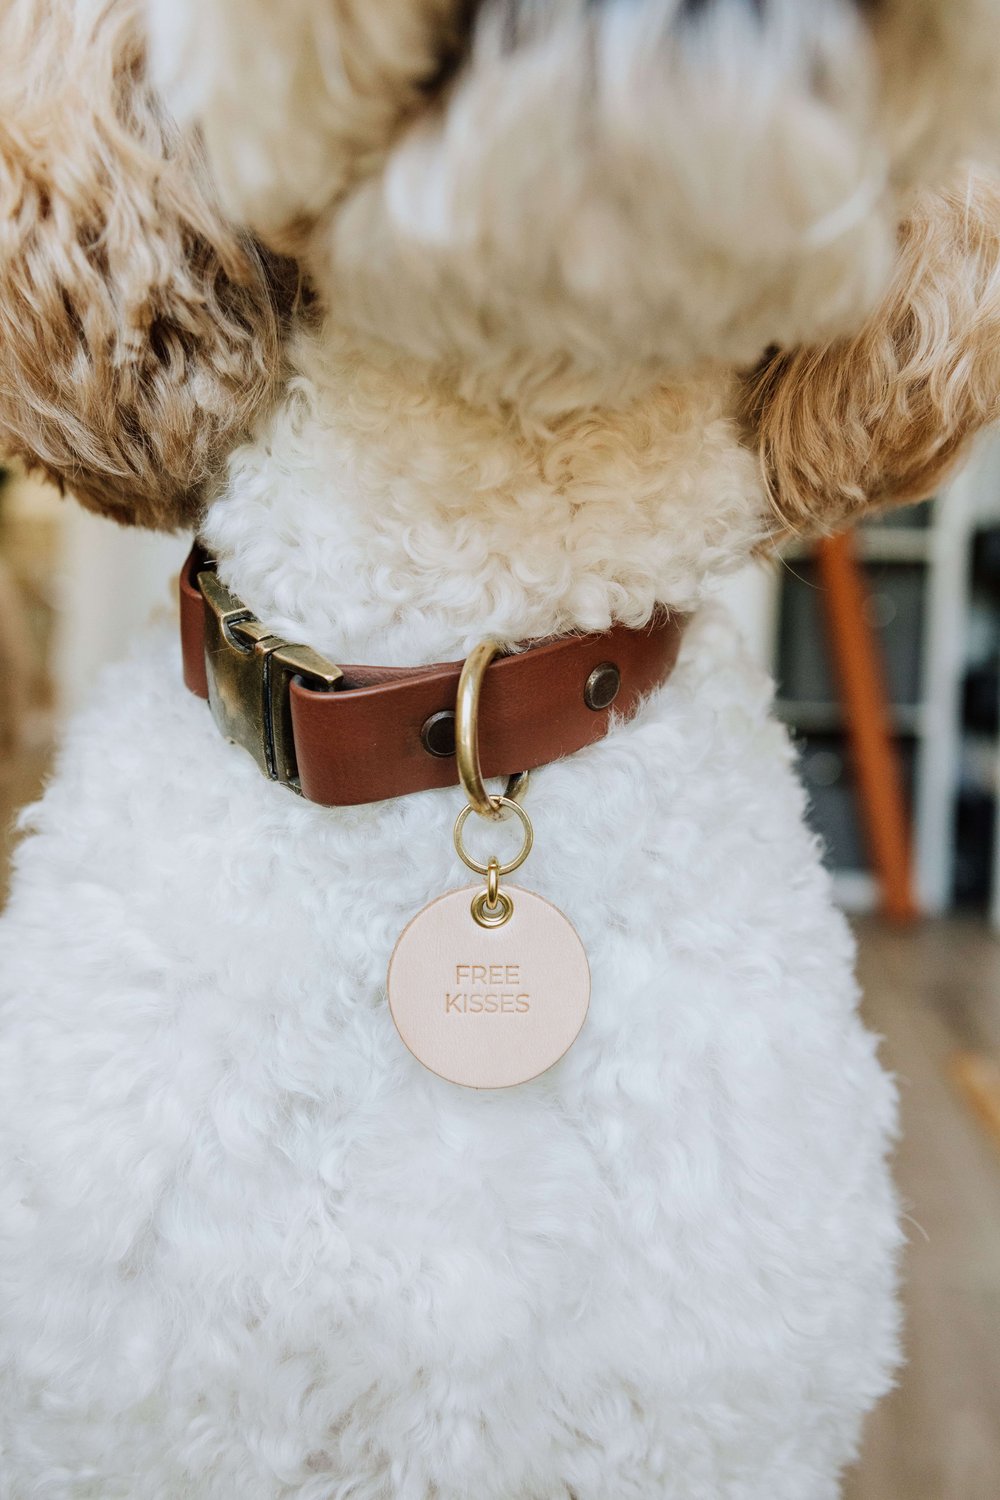 ‘Free Kisses’ Leather Pet Collar Tag